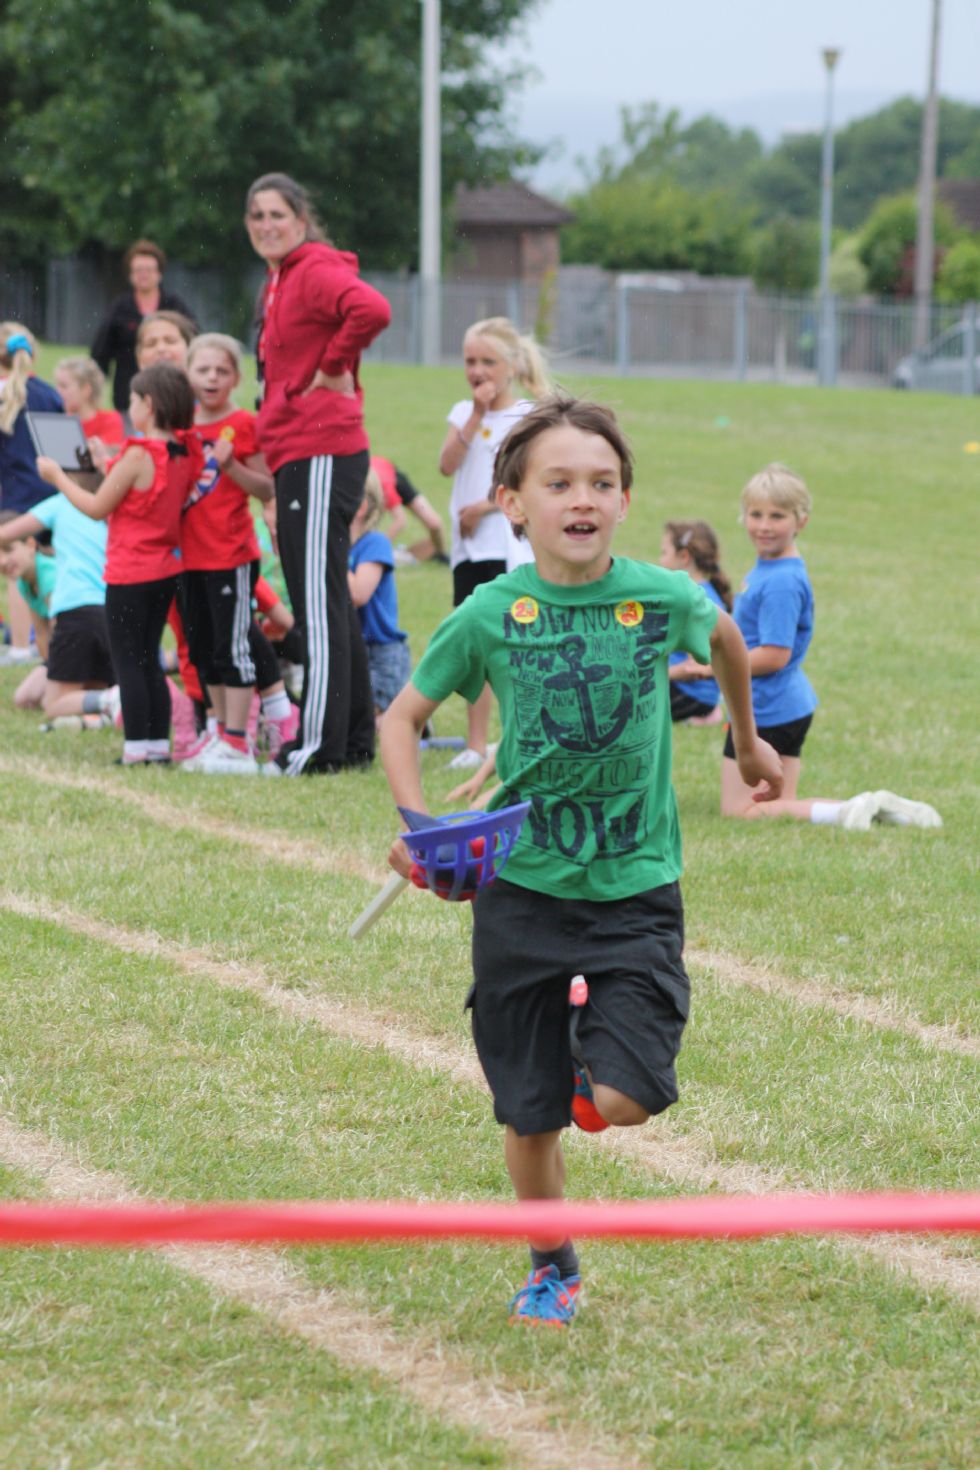   Sports Days at Fairfield